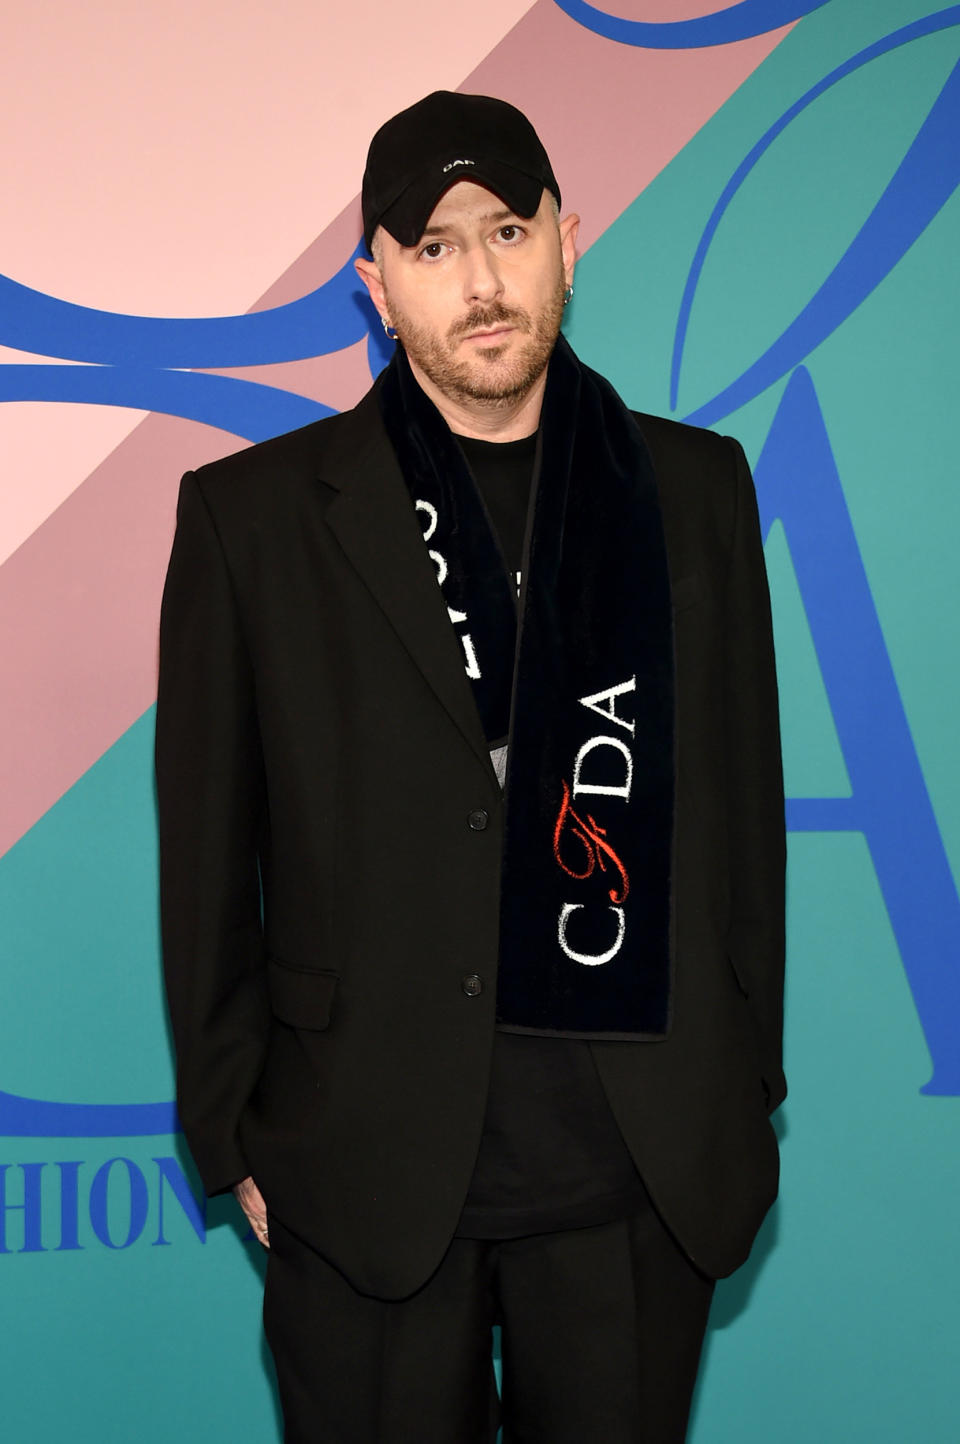 Demna Gvasalia attends the 2017 CFDA Fashion Awards at Hammerstein Ballroom on June 5, 2017 in New York City.   (Dimitrios Kambouris / Getty Images)